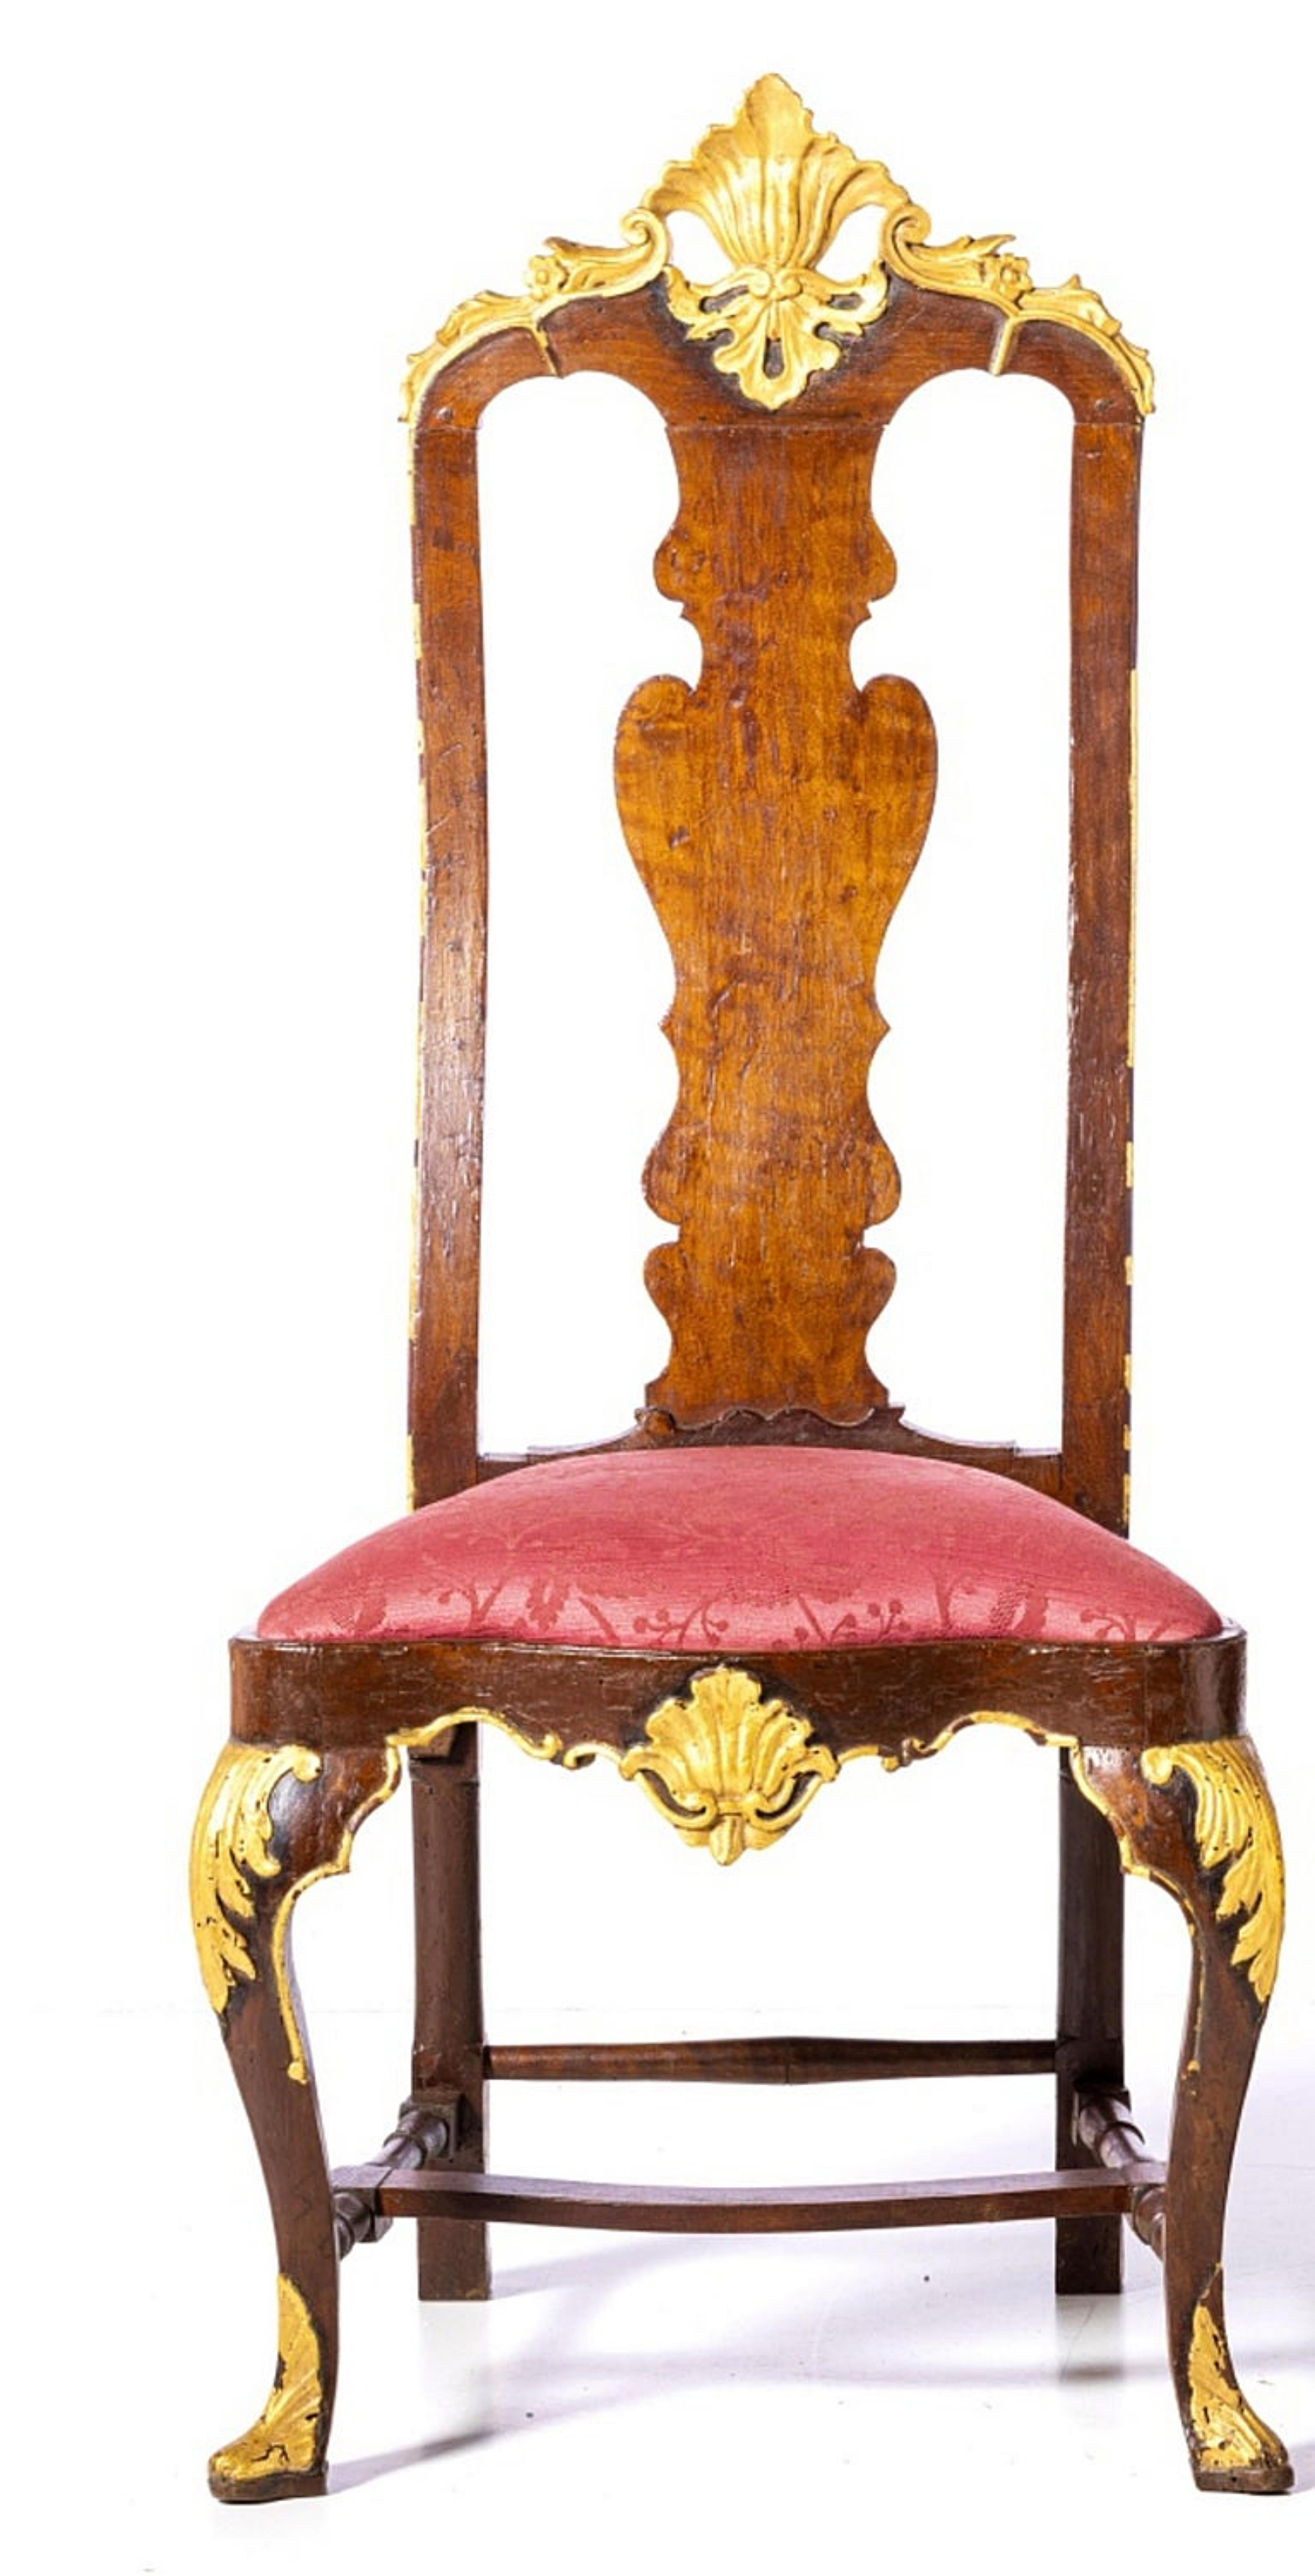 PAIR OF PORTUGUESE CHAIRS 18th Century

in carved and gilded walnut wood.
upholstered.
Dim.: 125 x 56 x 50 cm
good conditions.